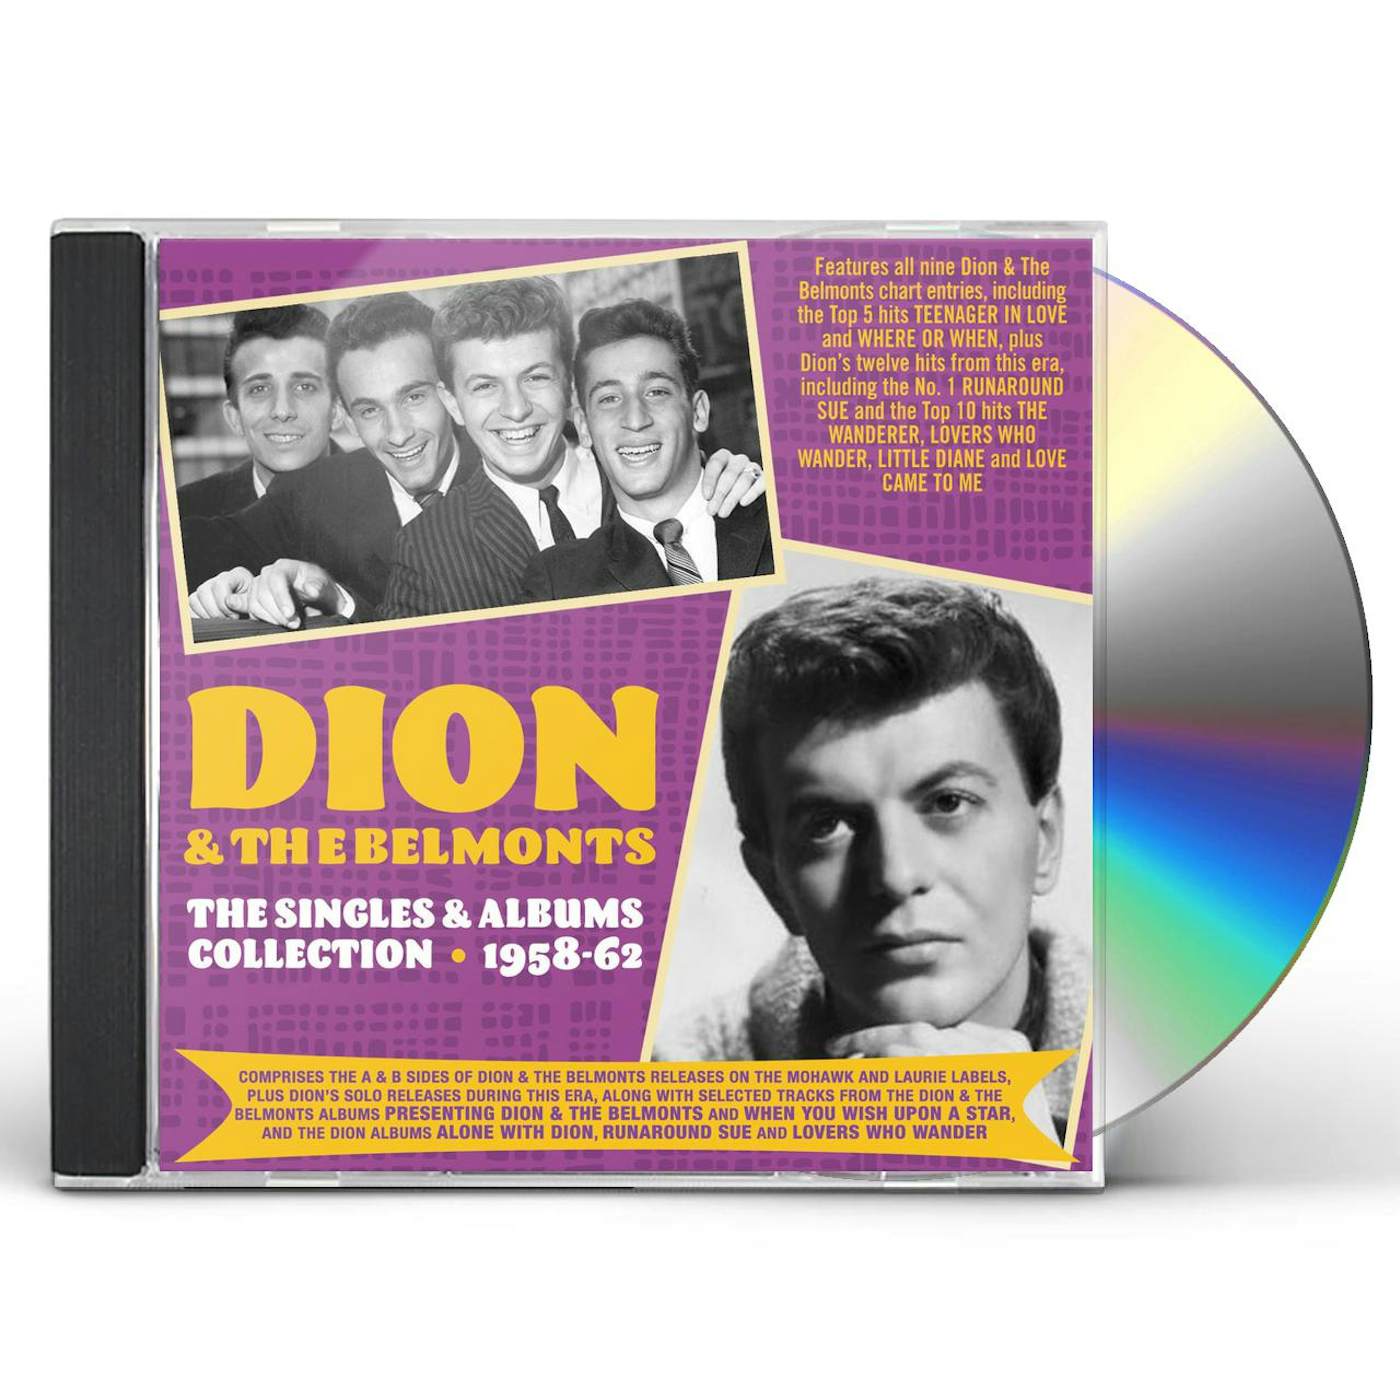 Dion & The Belmonts SINGLES & ALBUMS COLLECTION 1957-62 CD